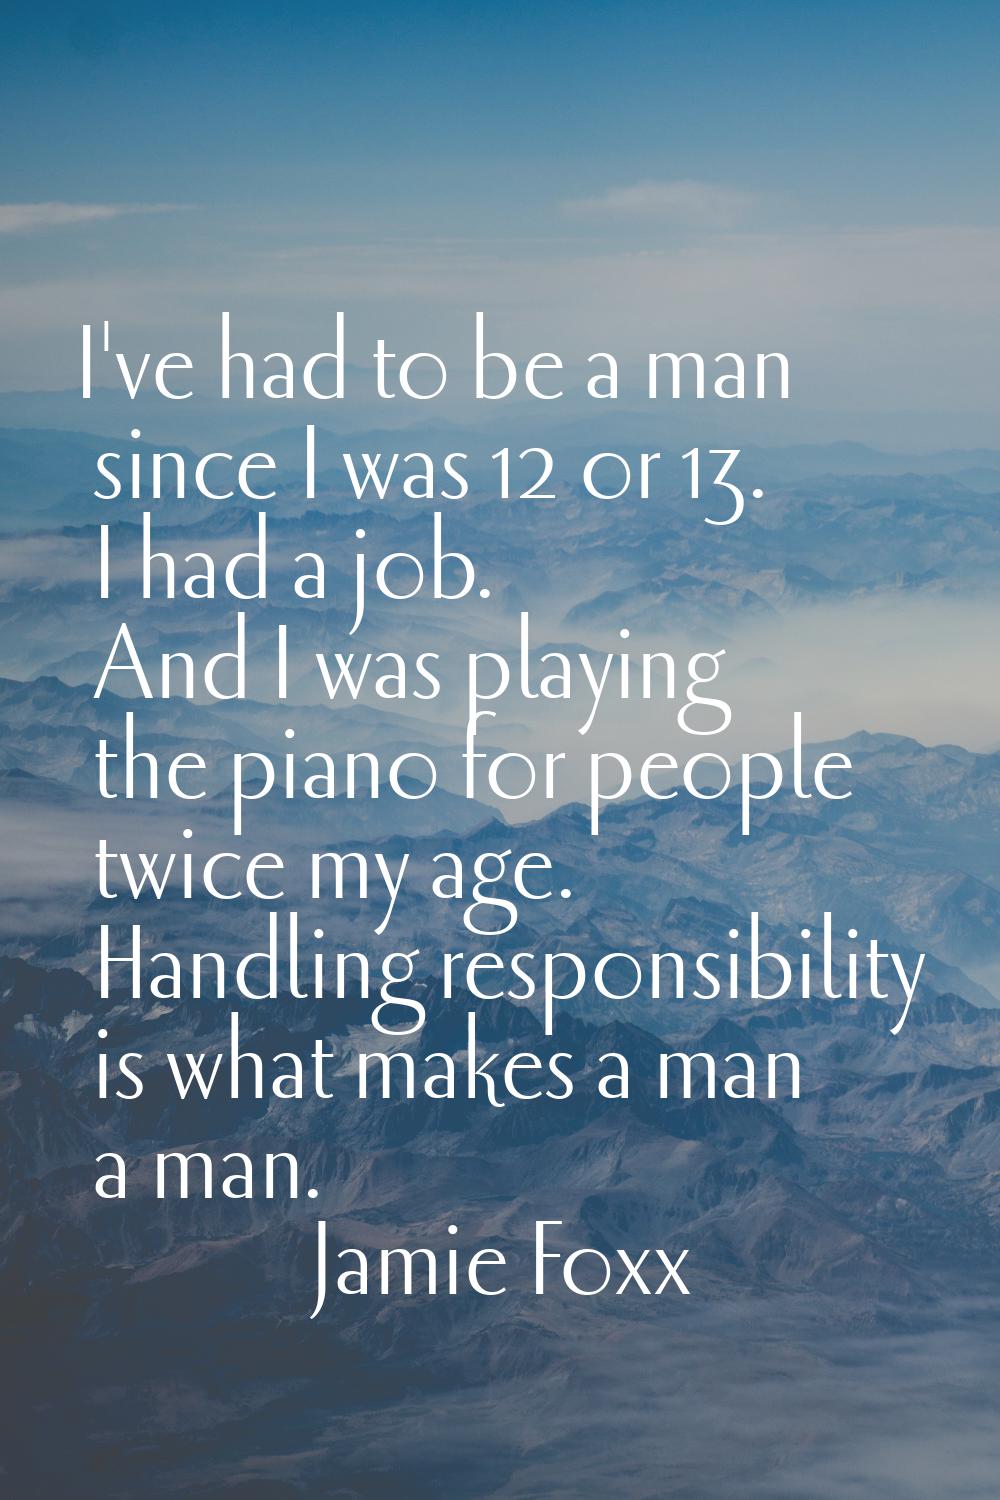 I've had to be a man since I was 12 or 13. I had a job. And I was playing the piano for people twic